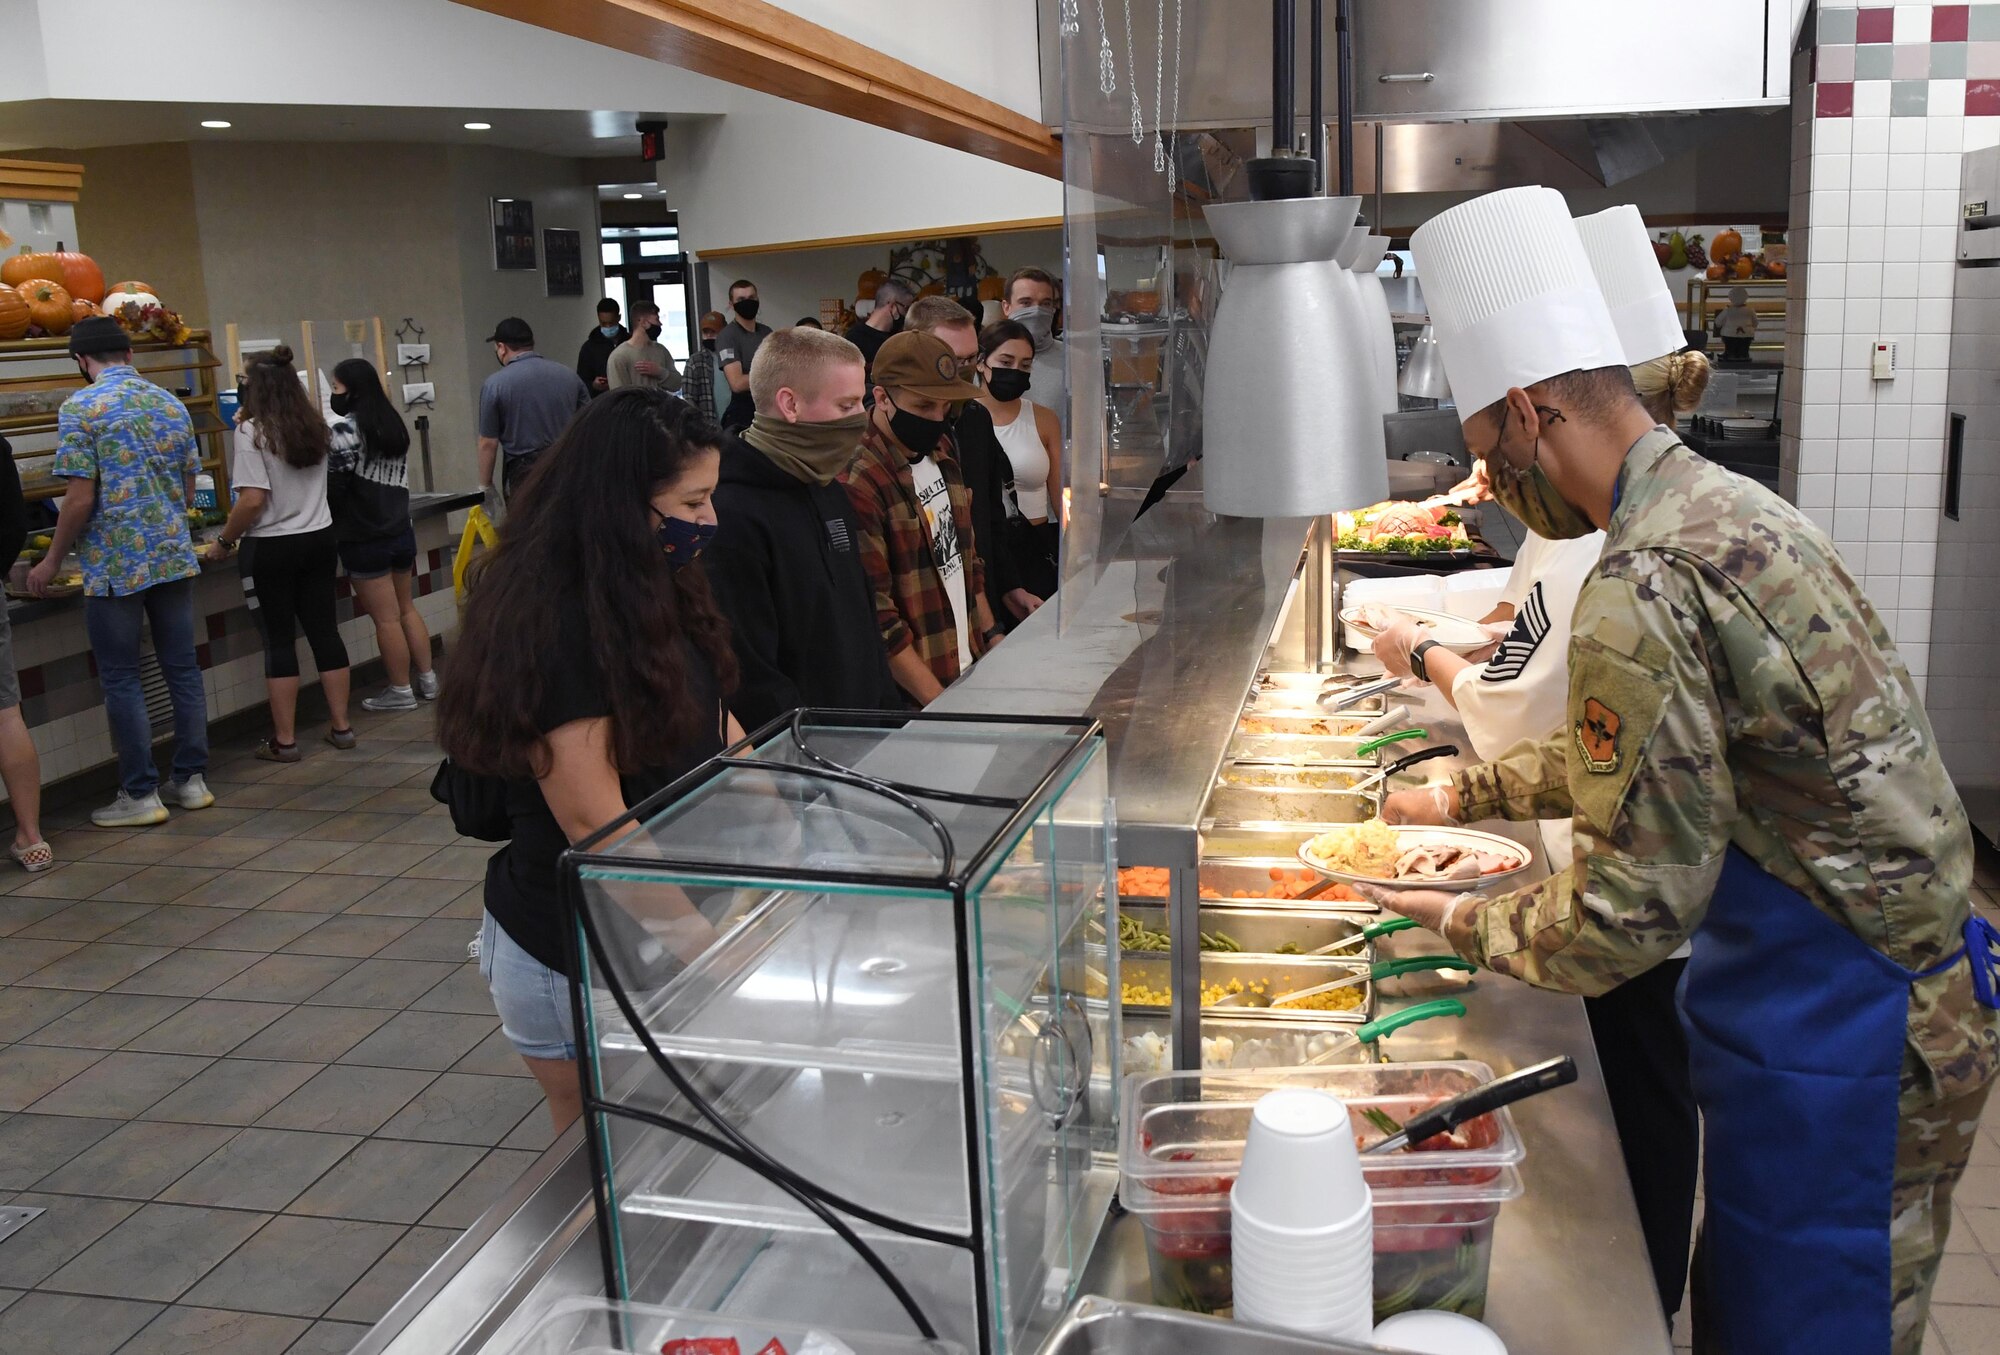 Keesler leadership serves lunch to 81st Training Group students inside the Azalea Dining Facility at Keesler Air Force Base, Mississippi, Nov. 26, 2020. It is tradition at Keesler for commanders, first sergeants and superintendents to serve a Thanksgiving meal at the dining facility to technical training and permanent party Airmen who are not able to go home for the holiday. (U.S. Air Force photo by Kemberly Groue)